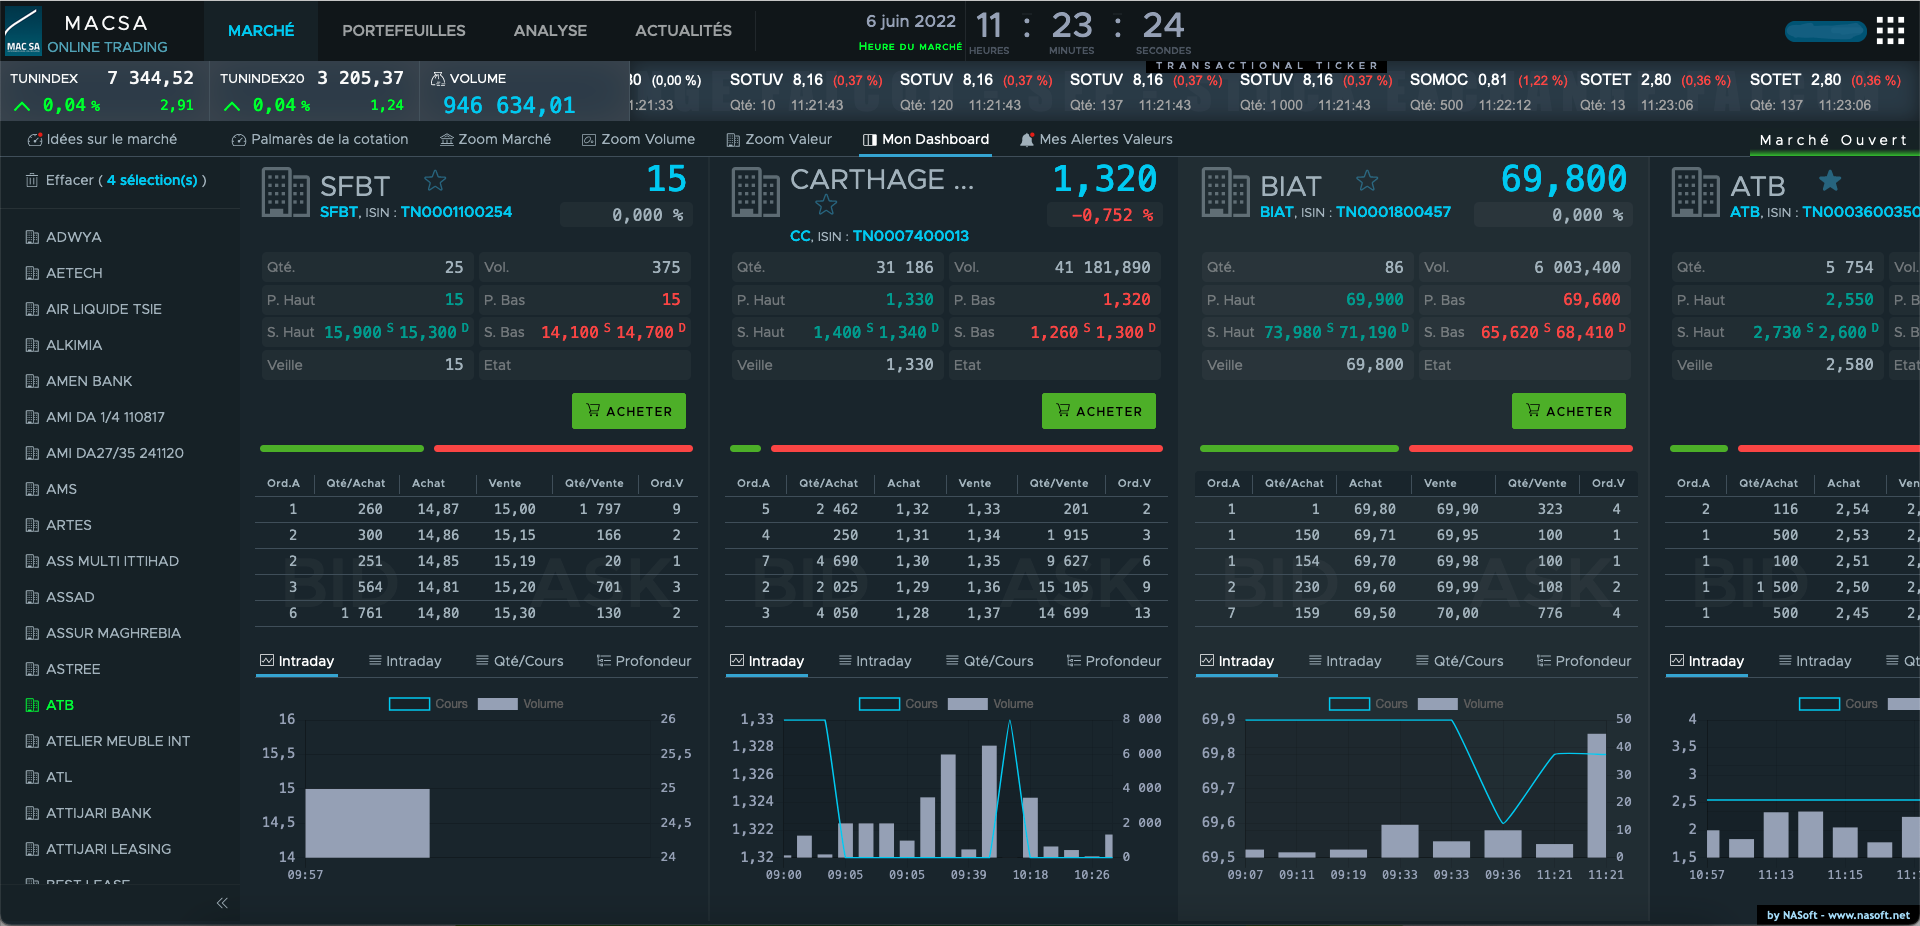 You can create your own dashboard with the desired equities.
			You keep a close focus on the equities you interested in.
			Your choices are persistant.